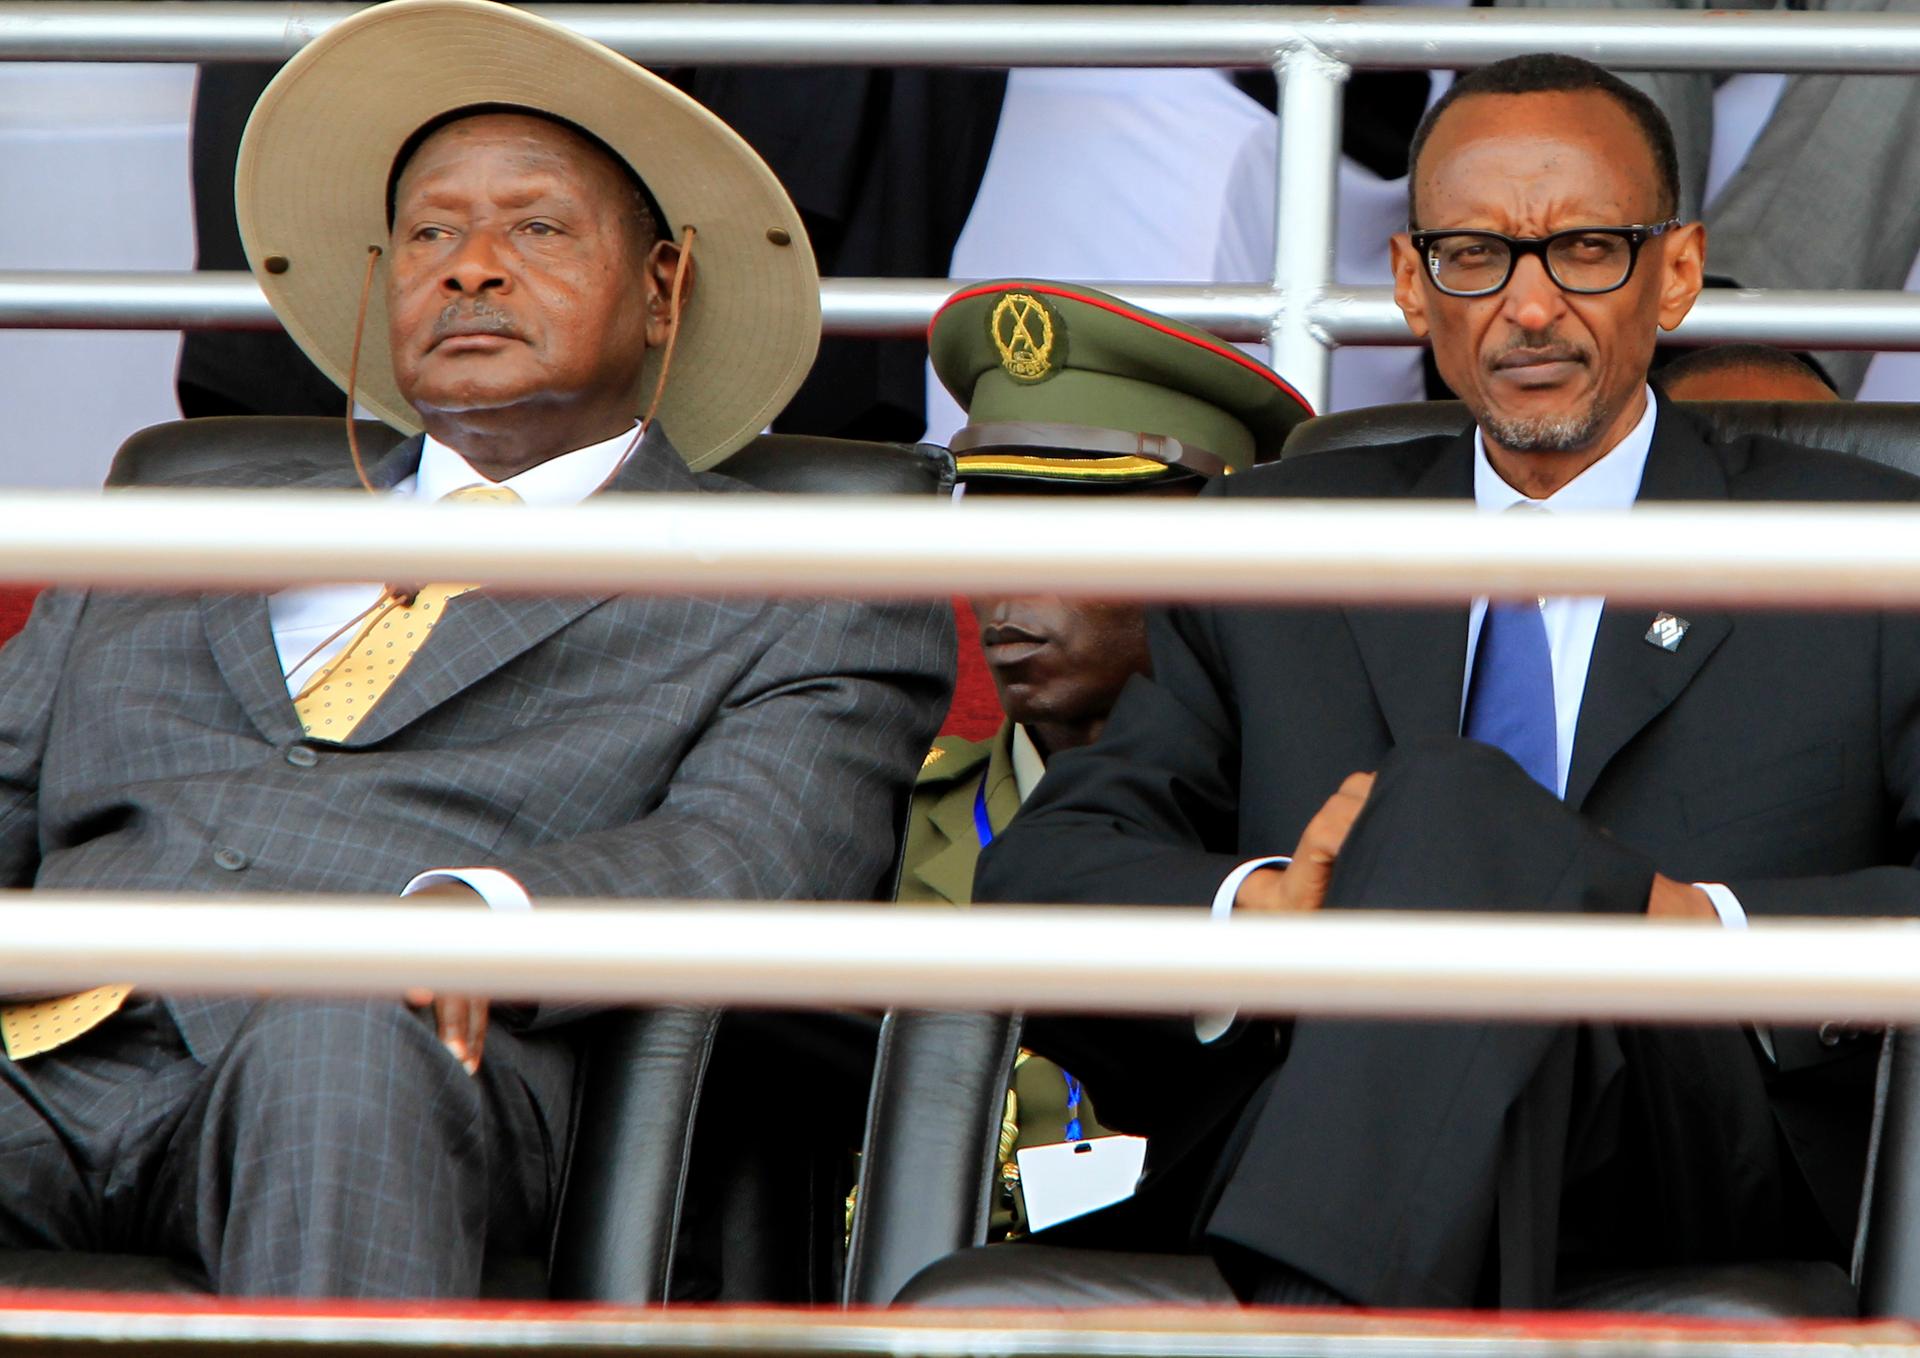 Rwandan President Paul Kagame (R) and his Ugandan counterpart Yoweri Museveni follow the proceedings of the 20th anniversary commemoration of the Rwandan genocide, in Kigali April 7, 2014. An estimated 800,000 people were killed in 100 days during the gen